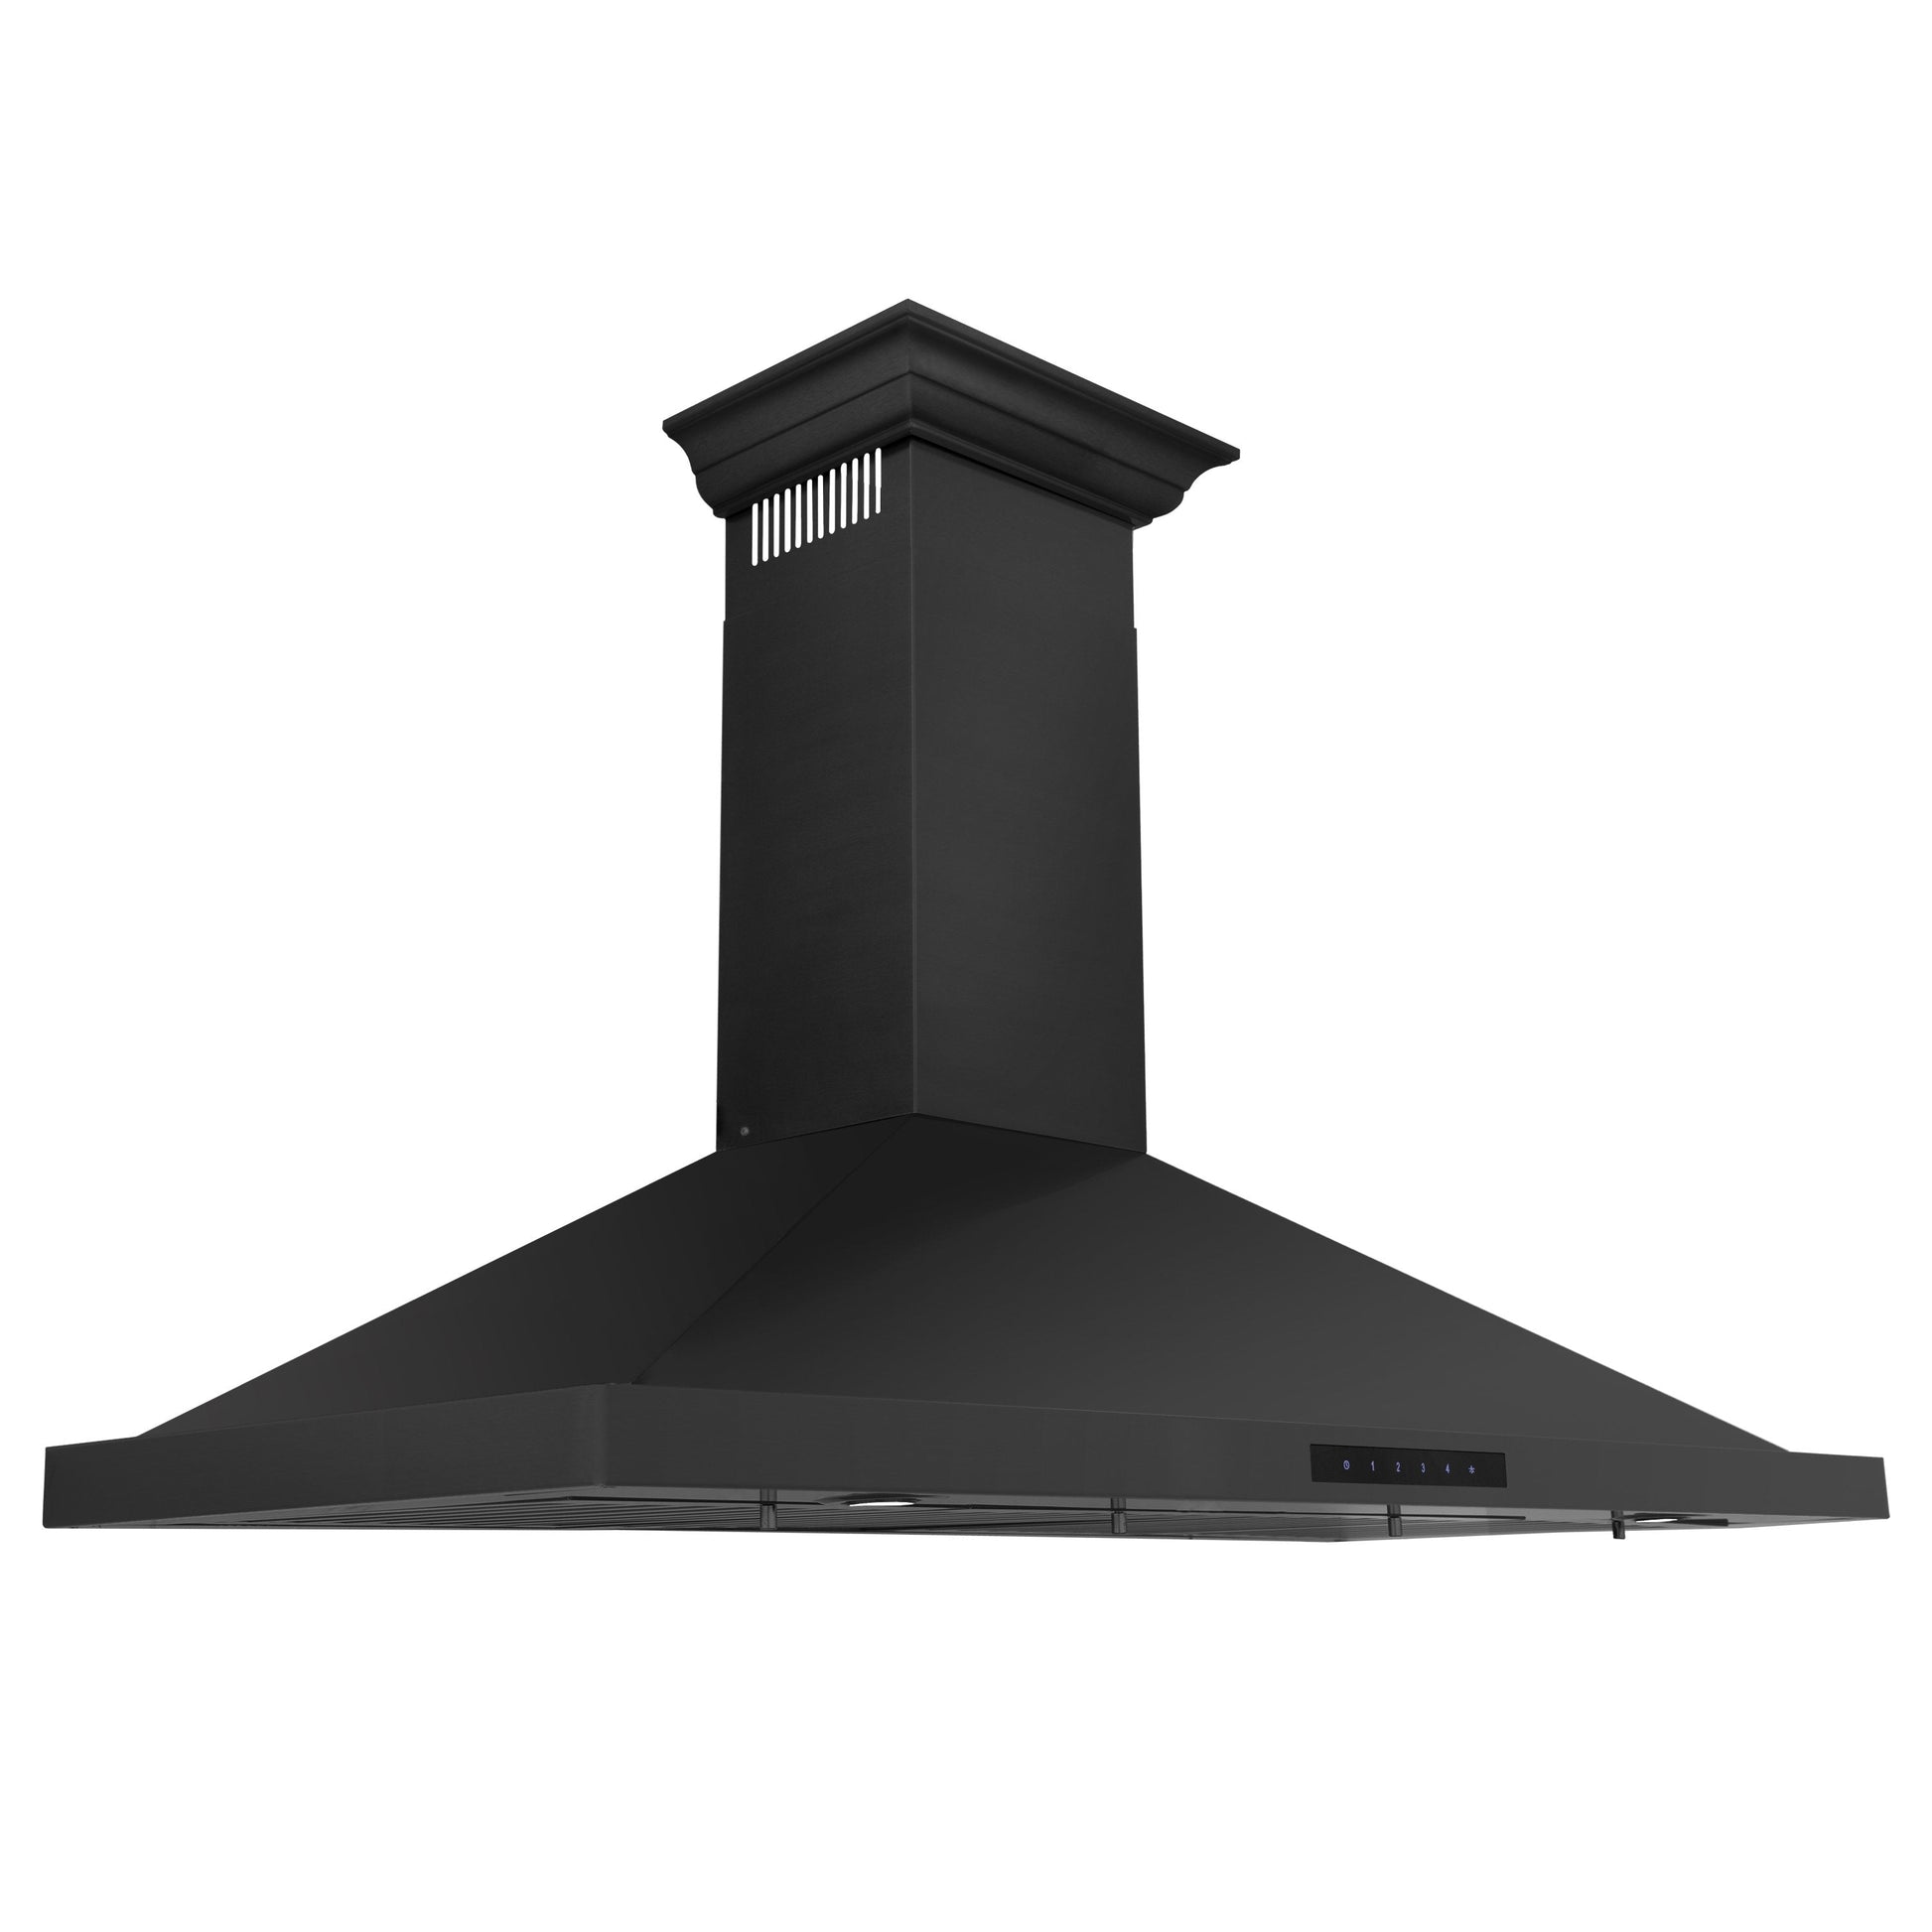 ZLINE Convertible Vent Wall Mount Range Hood - Black Stainless Steel with Crown Molding